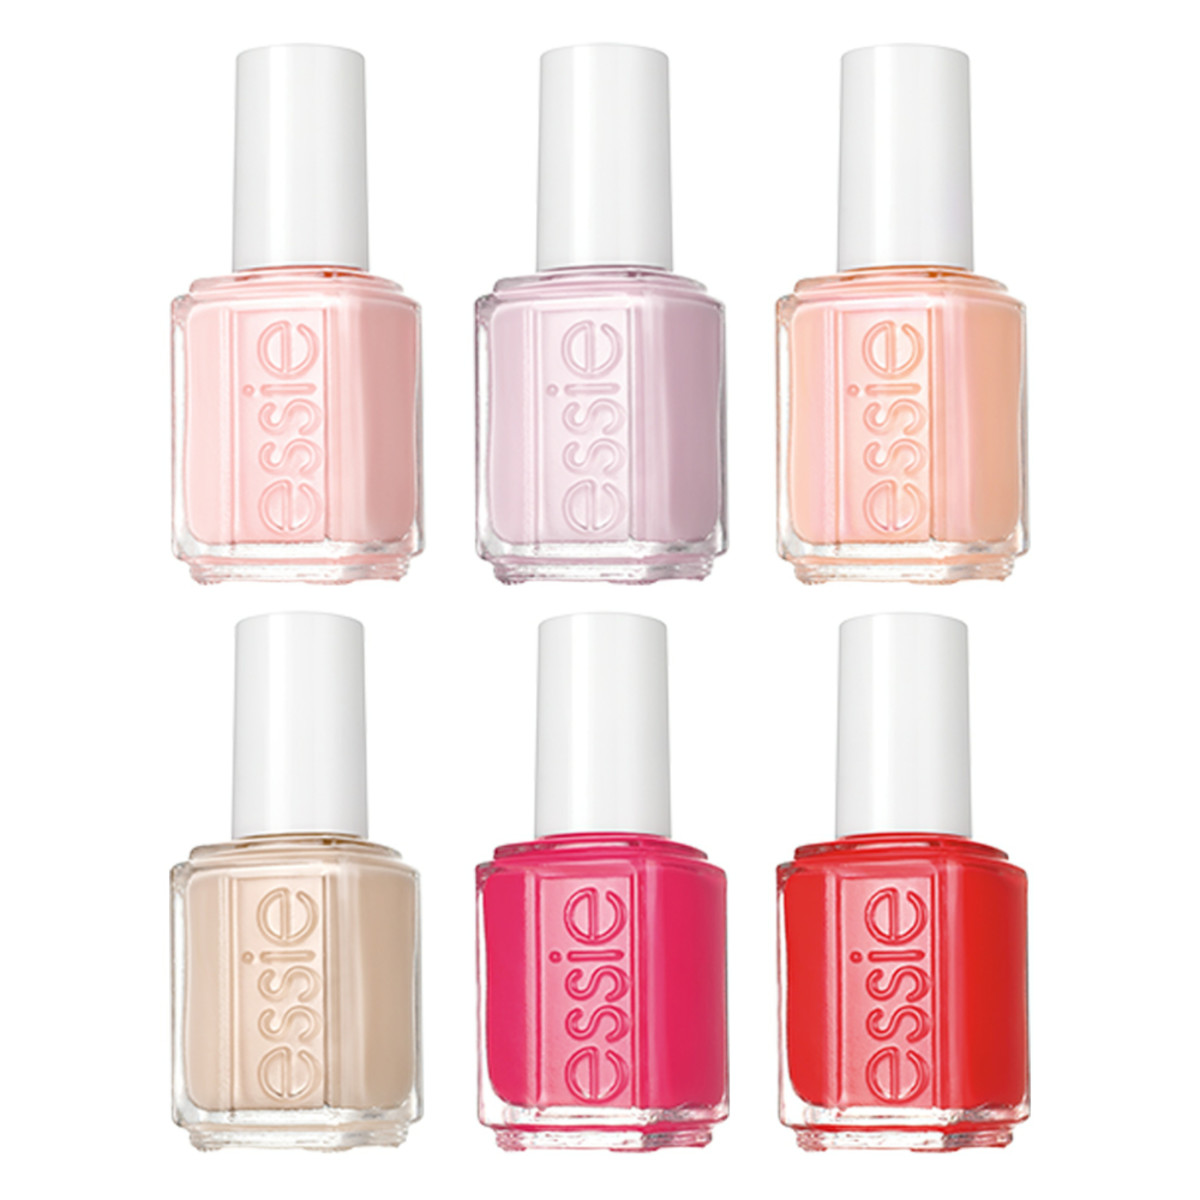 ESSIE BRIDAL 2015 COLLECTION: FIRST LOOK - Beautygeeks